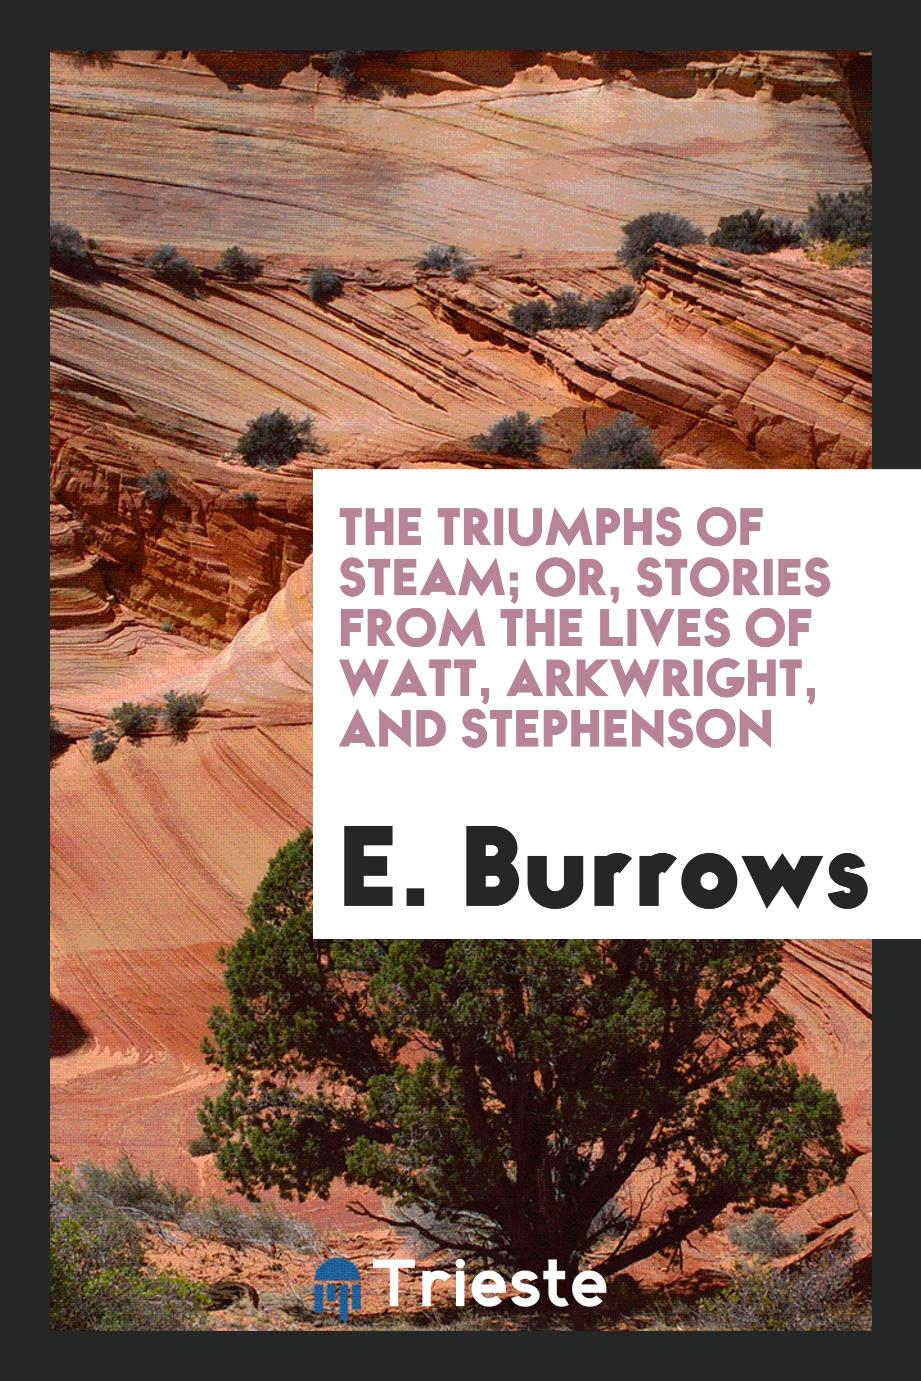 The triumphs of steam; or, stories from the lives of Watt, Arkwright, and Stephenson